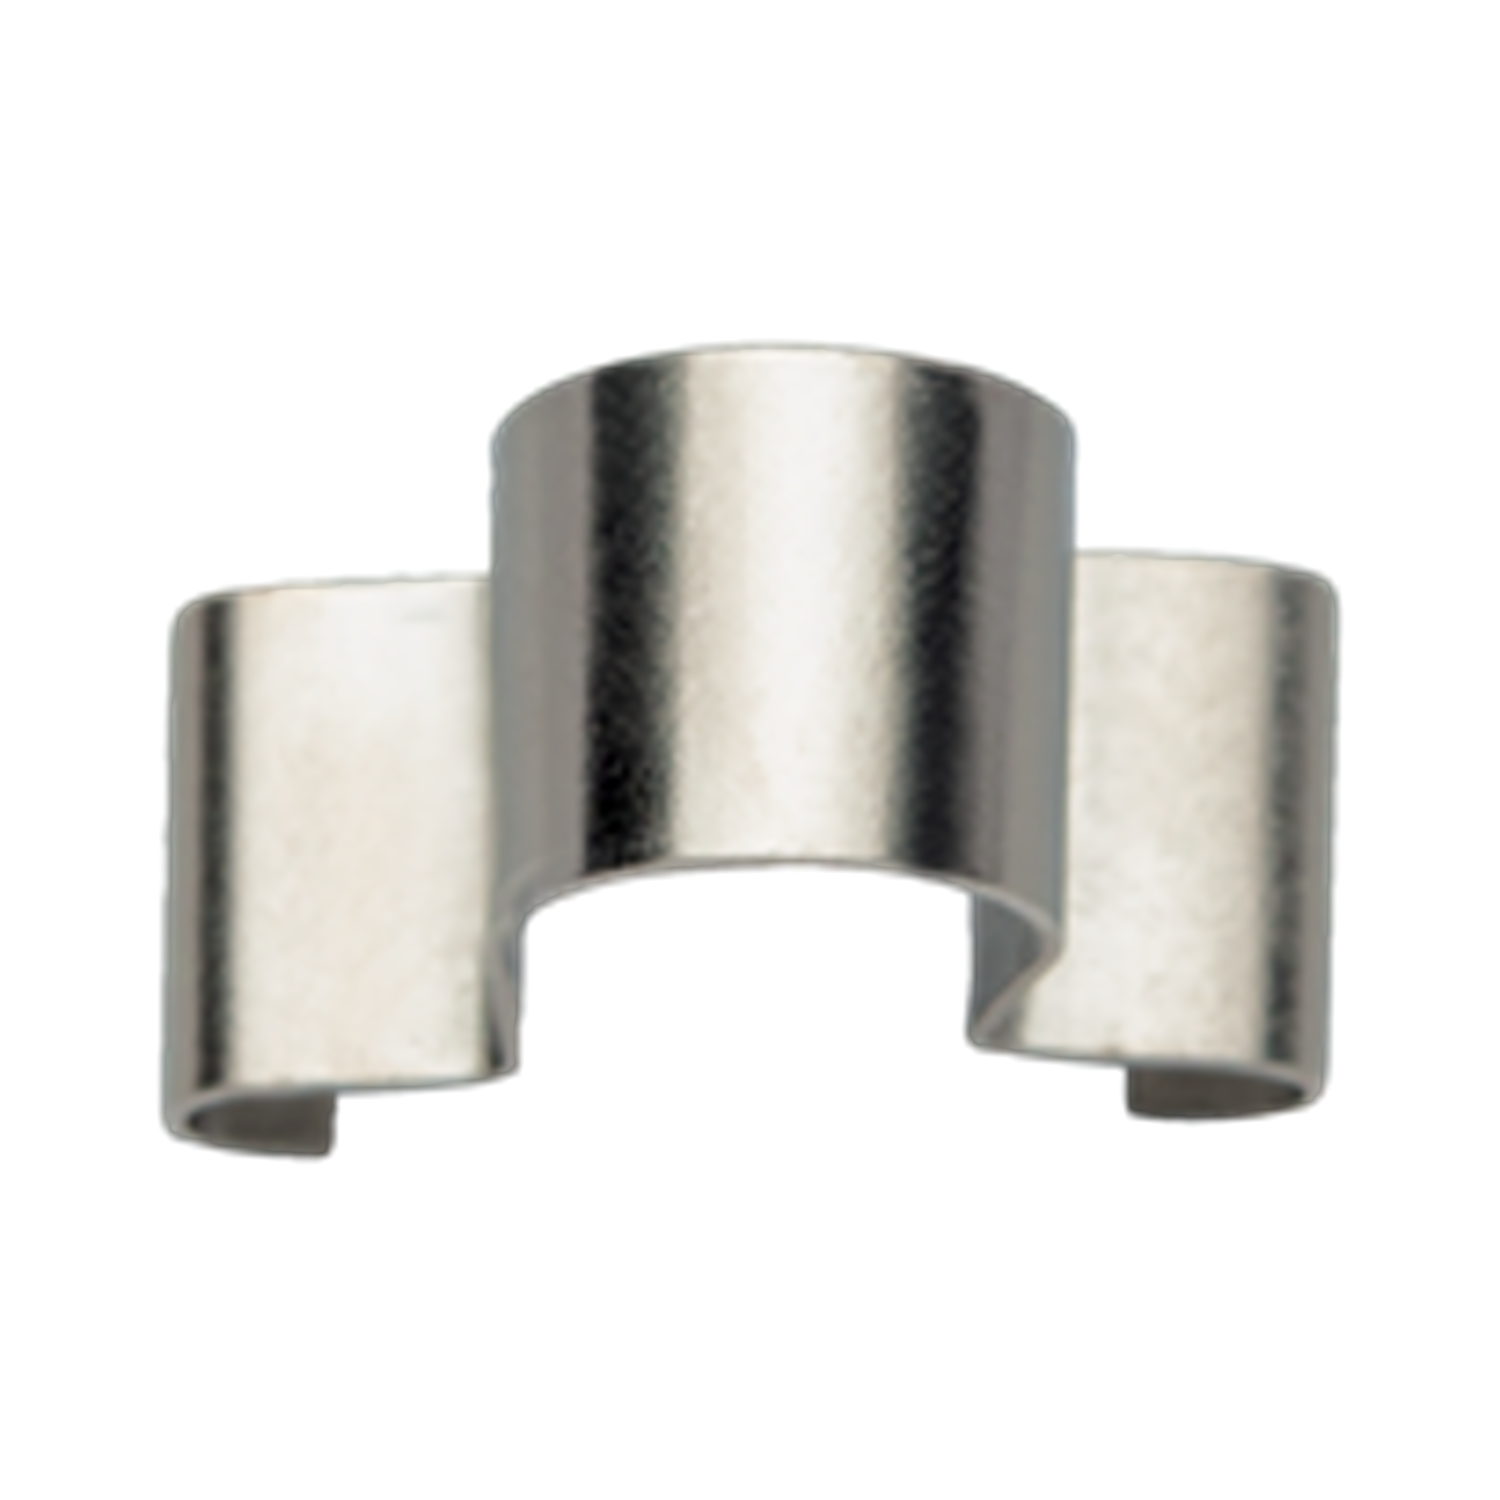 BAHCO C3/8 Rail-Clip for 3/8 Sockets/Socket Drivers (BAHCO Tools) - Premium Rail-Clip from BAHCO - Shop now at Yew Aik.